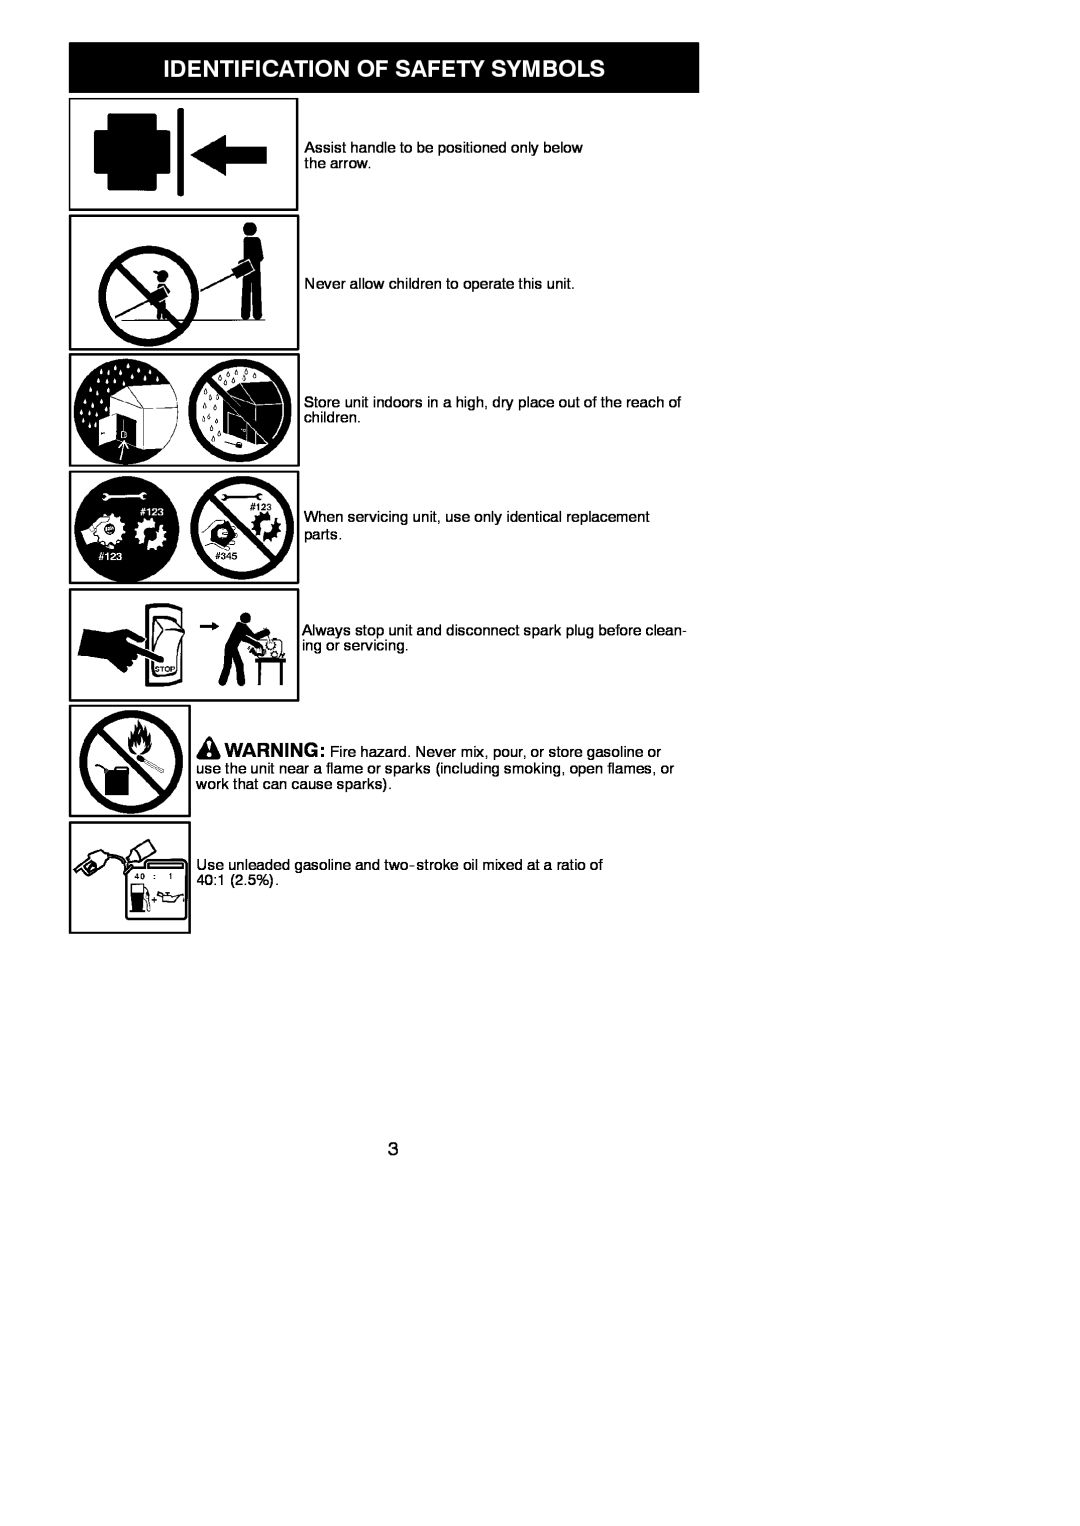 Poulan 115248726, 952711943 Identification Of Safety Symbols, Assist handle to be positioned only below the arrow 